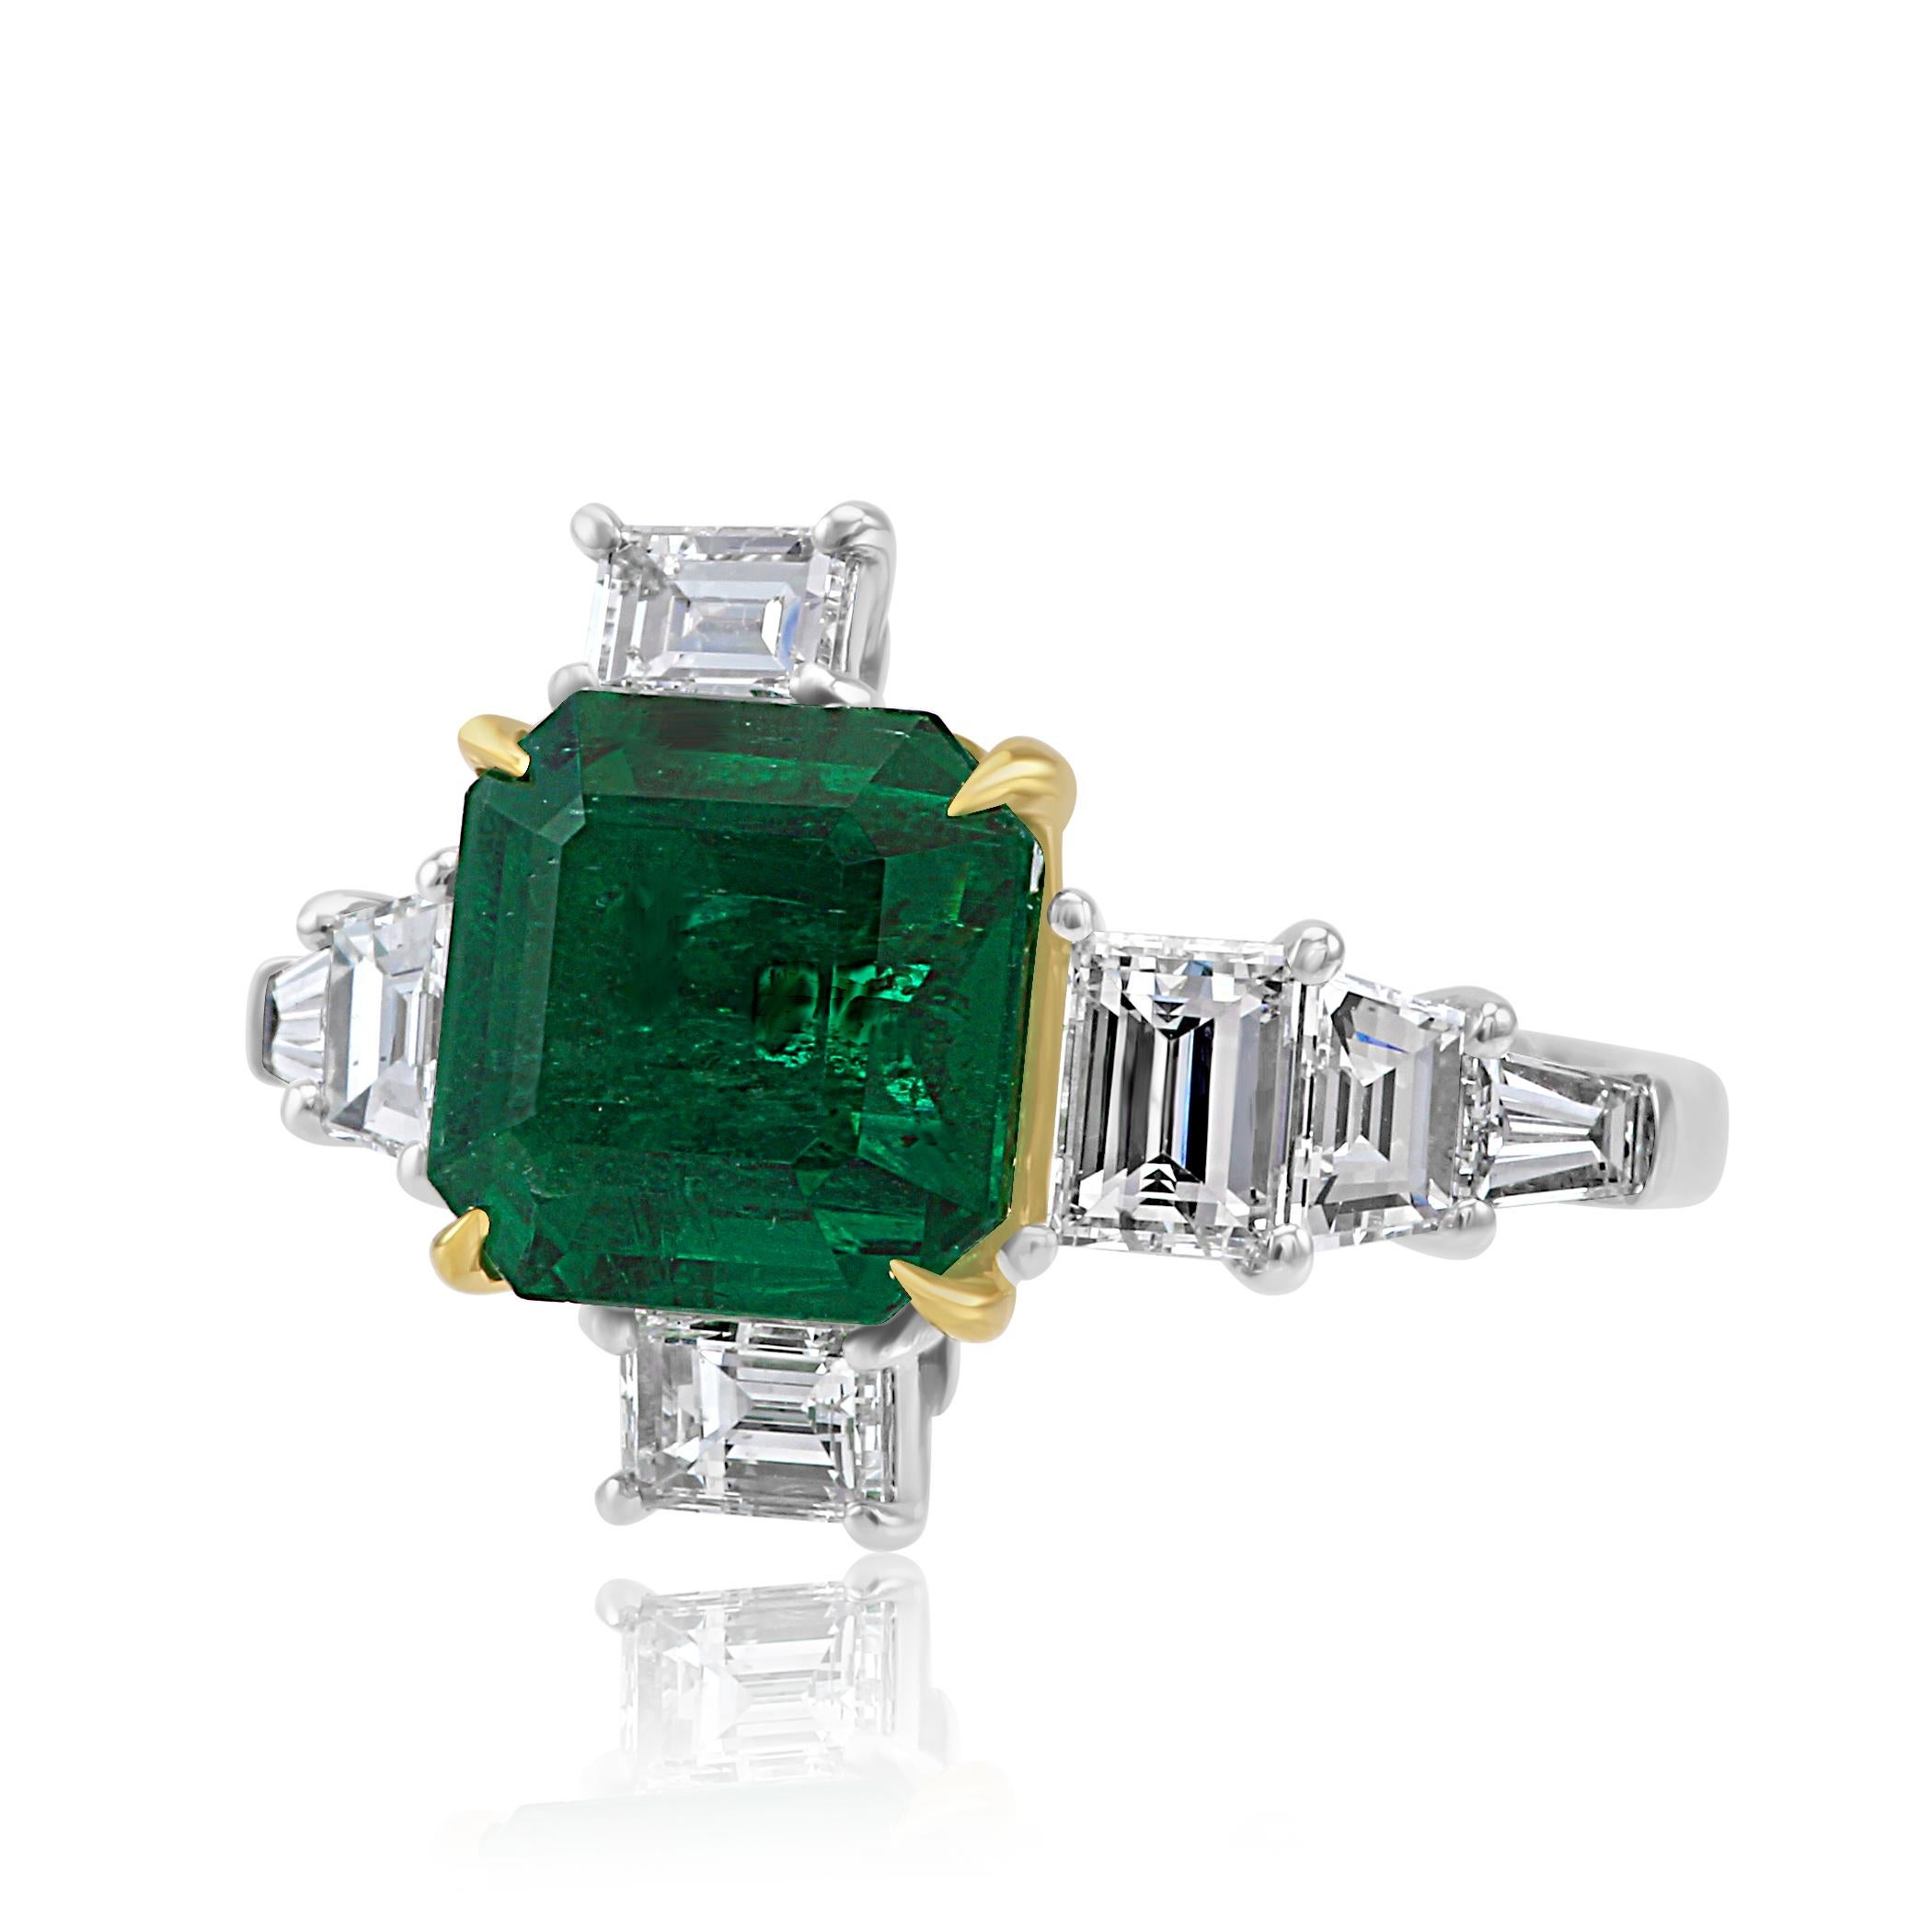 Stunning GIA Certified Emerald Square Emerald Cut 3.50 Carat Set with White G-H Color VS Clarity Mix Shapes Diamonds 1.50 Carat in one of a kind Contemporary  Hand Made asymmetrical Bridal Cocktail Fashion Ring in Plating and 18K Yellow Gold.

MADE